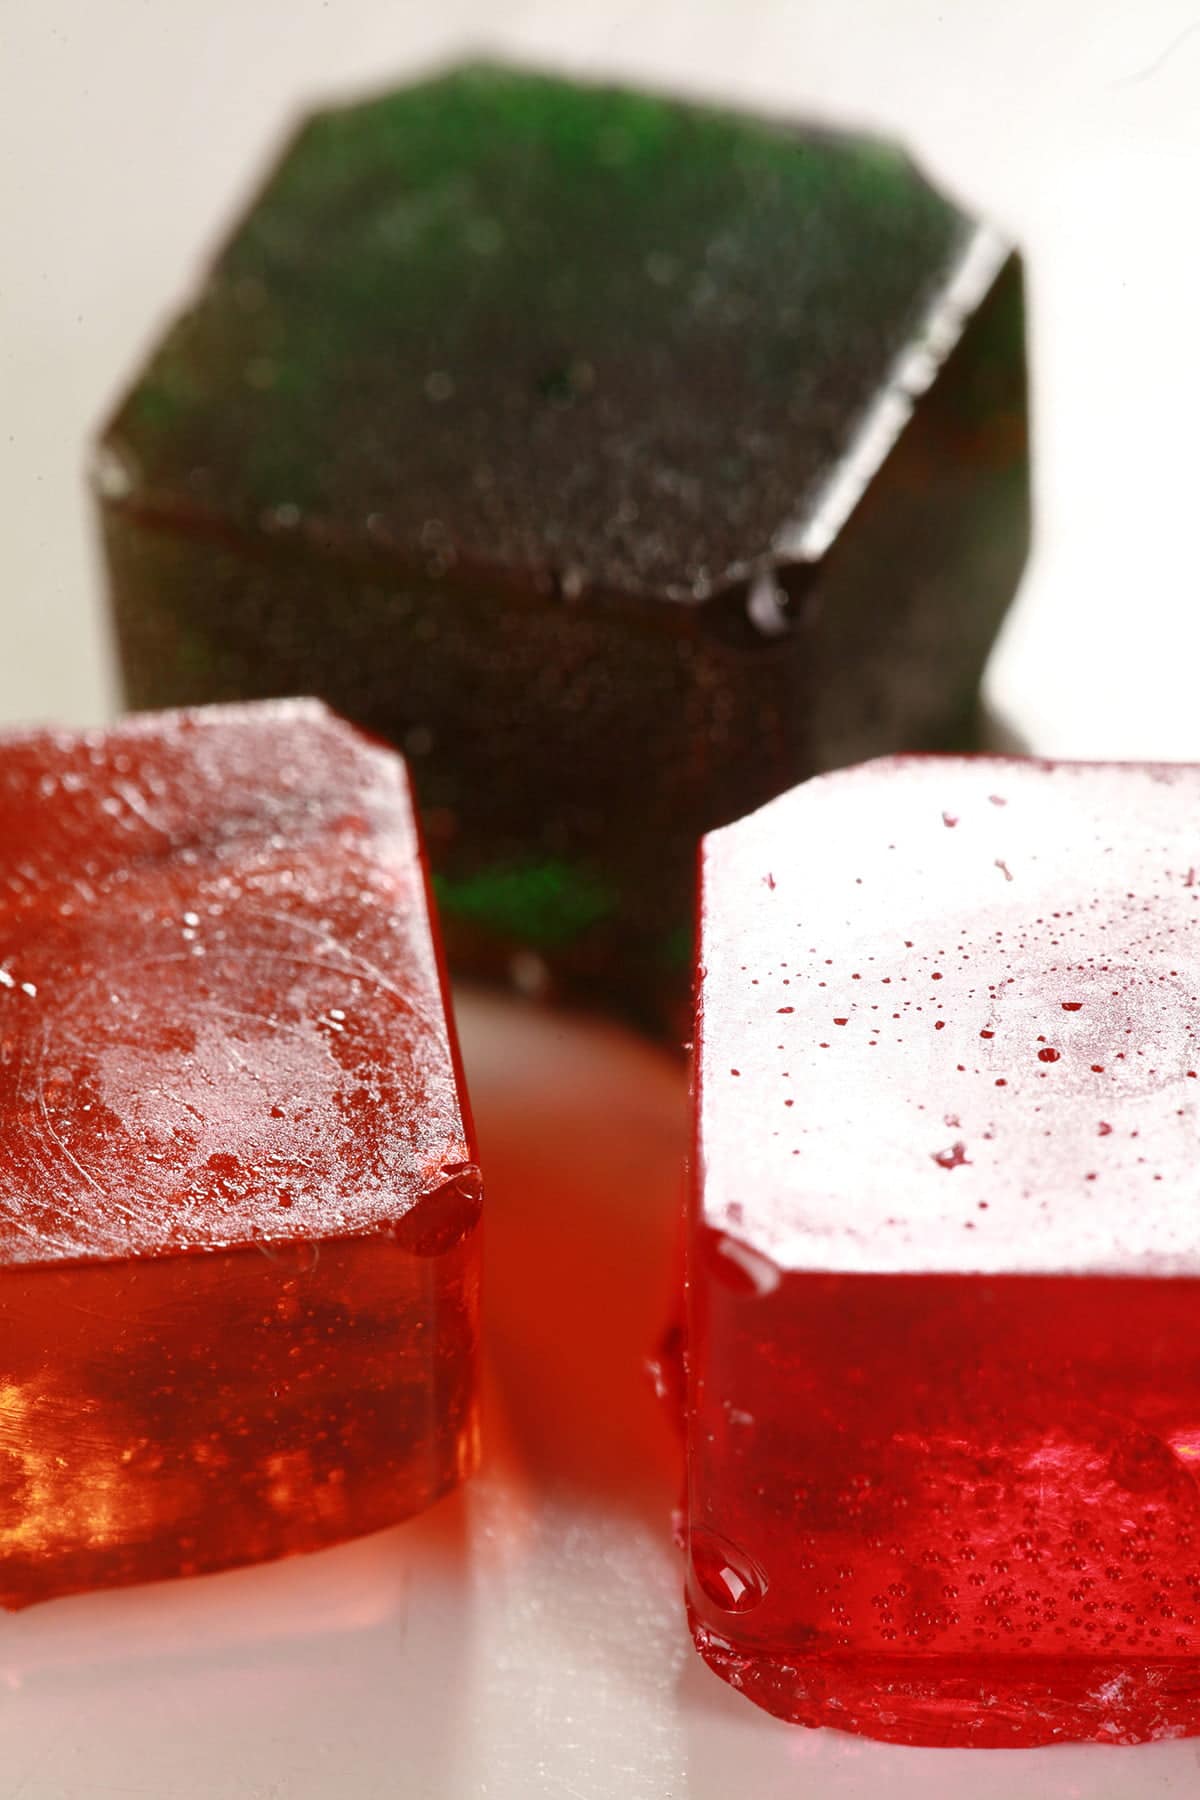 3 squares of colourful hard candy are shown on a white background.